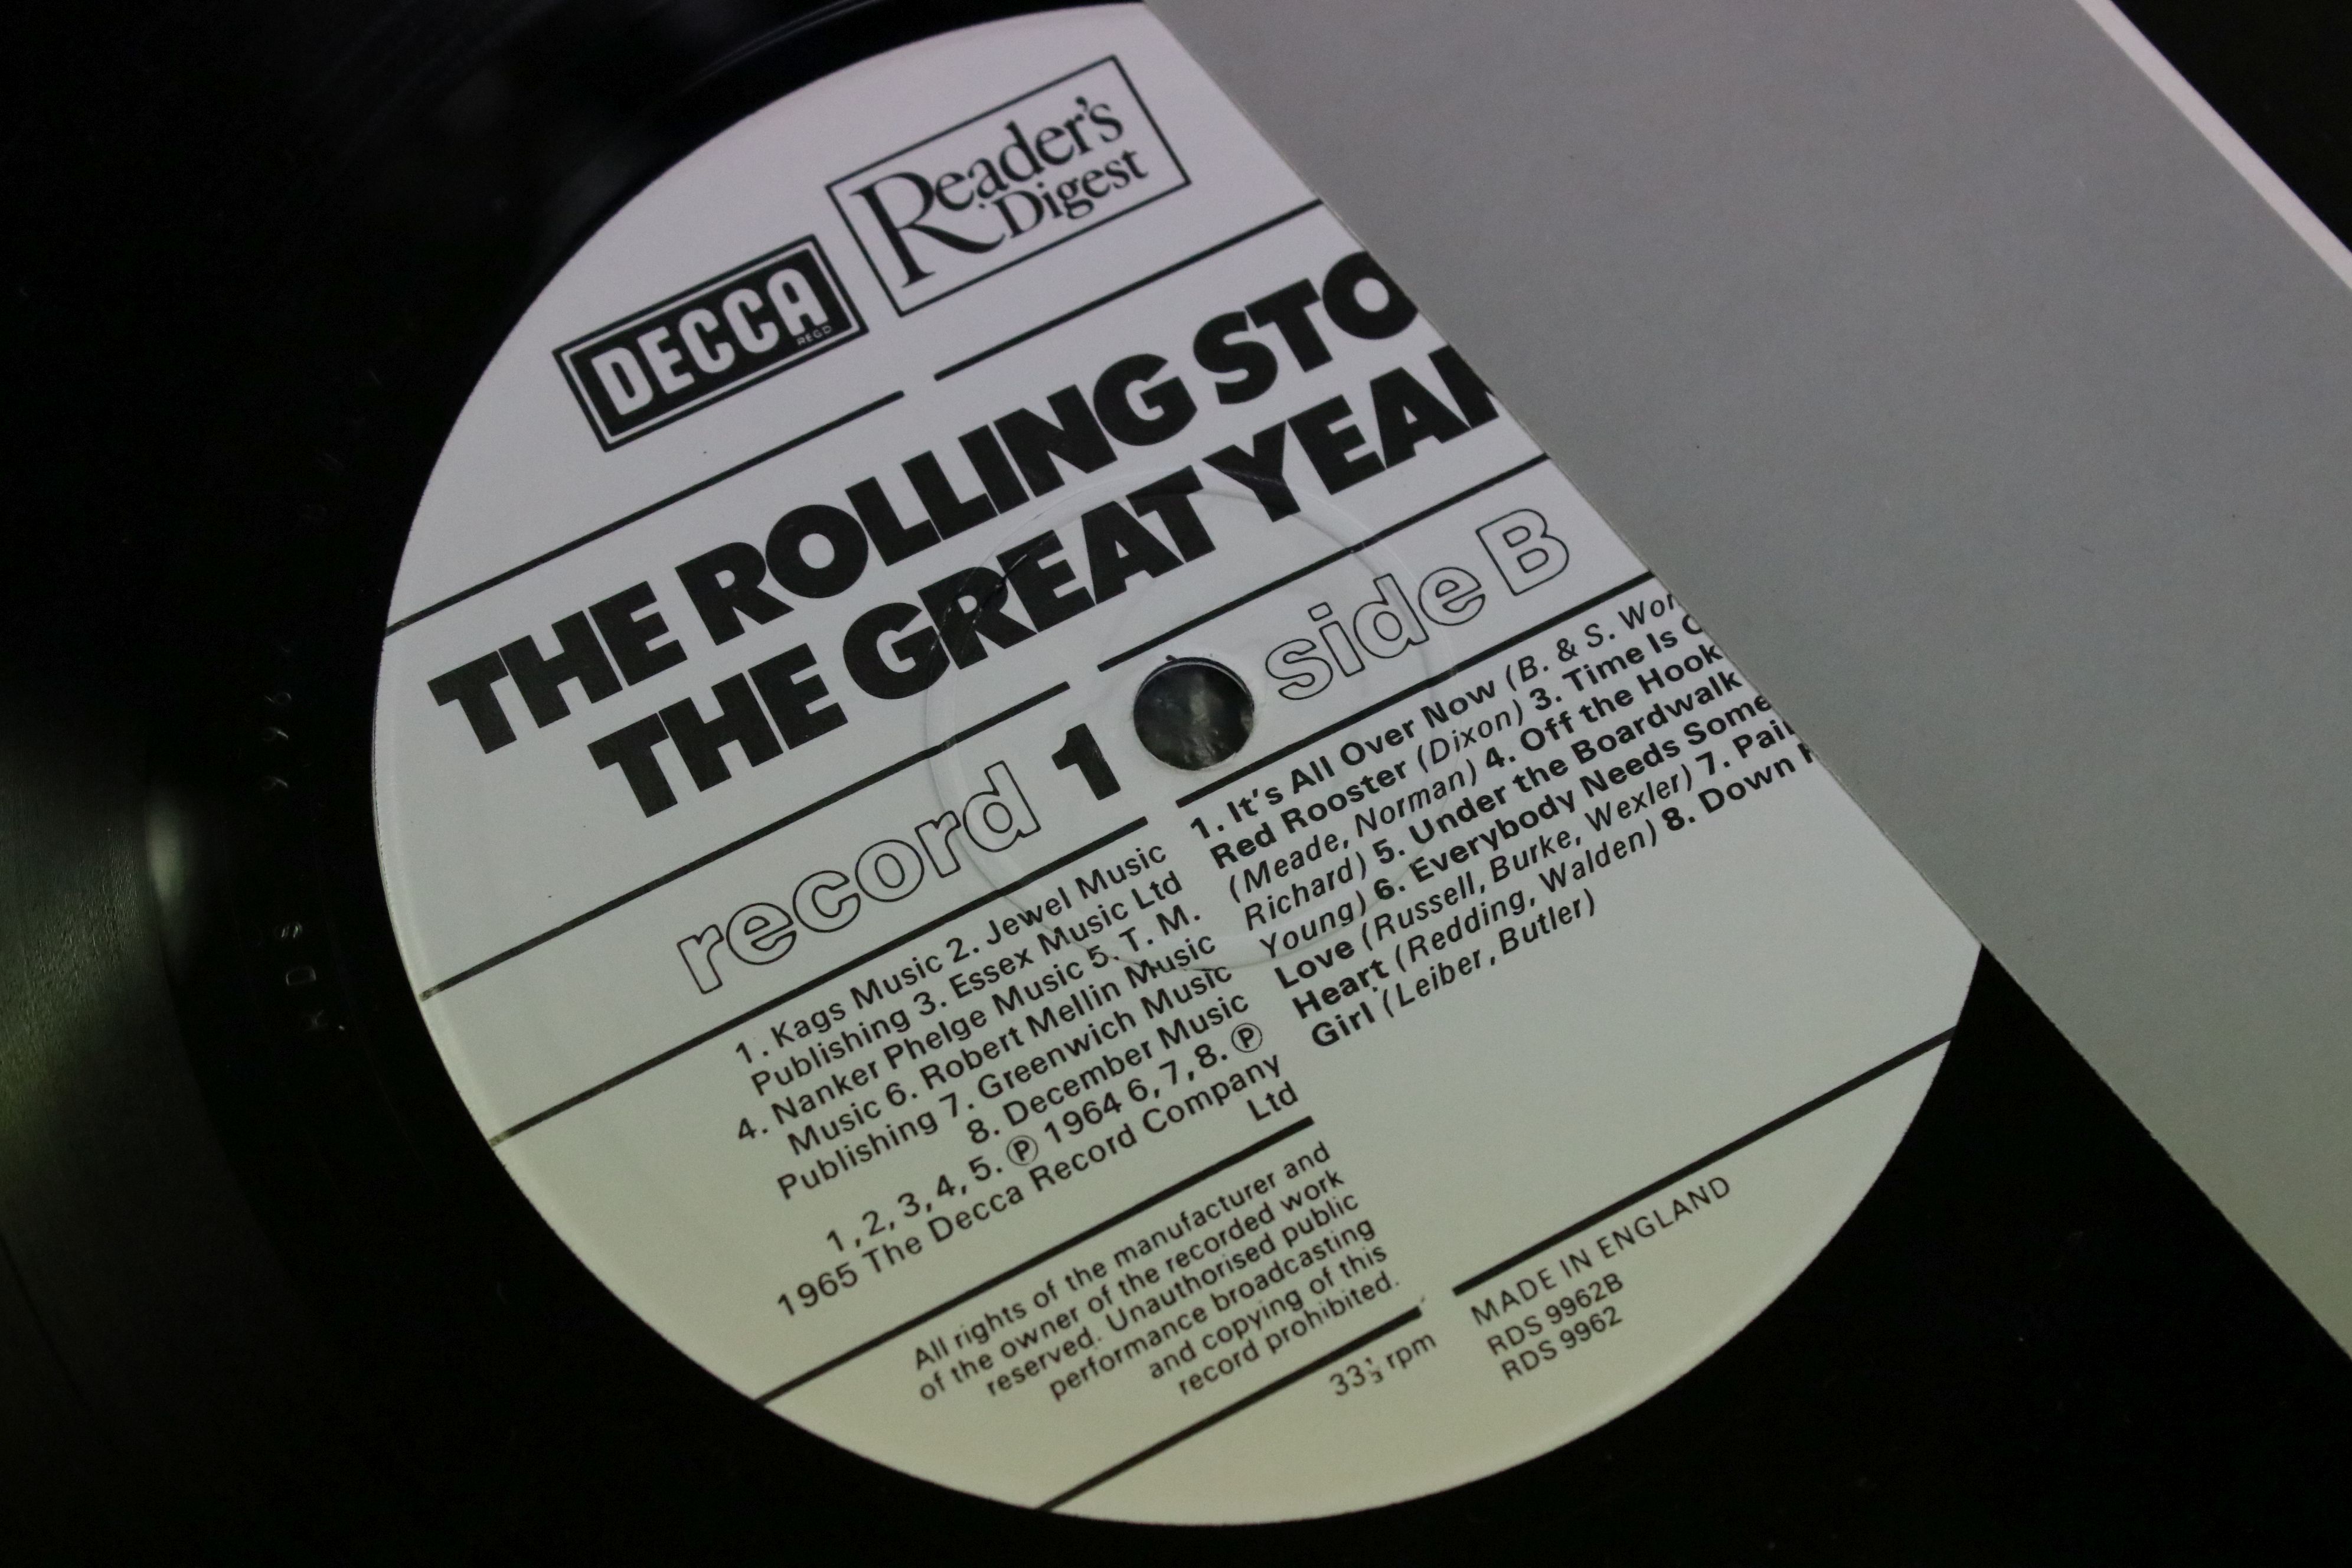 Vinyl - The Rolling Stones The Great Years Box Set on Readers Digest / Decca 4 LP Box Set, box, - Image 5 of 11